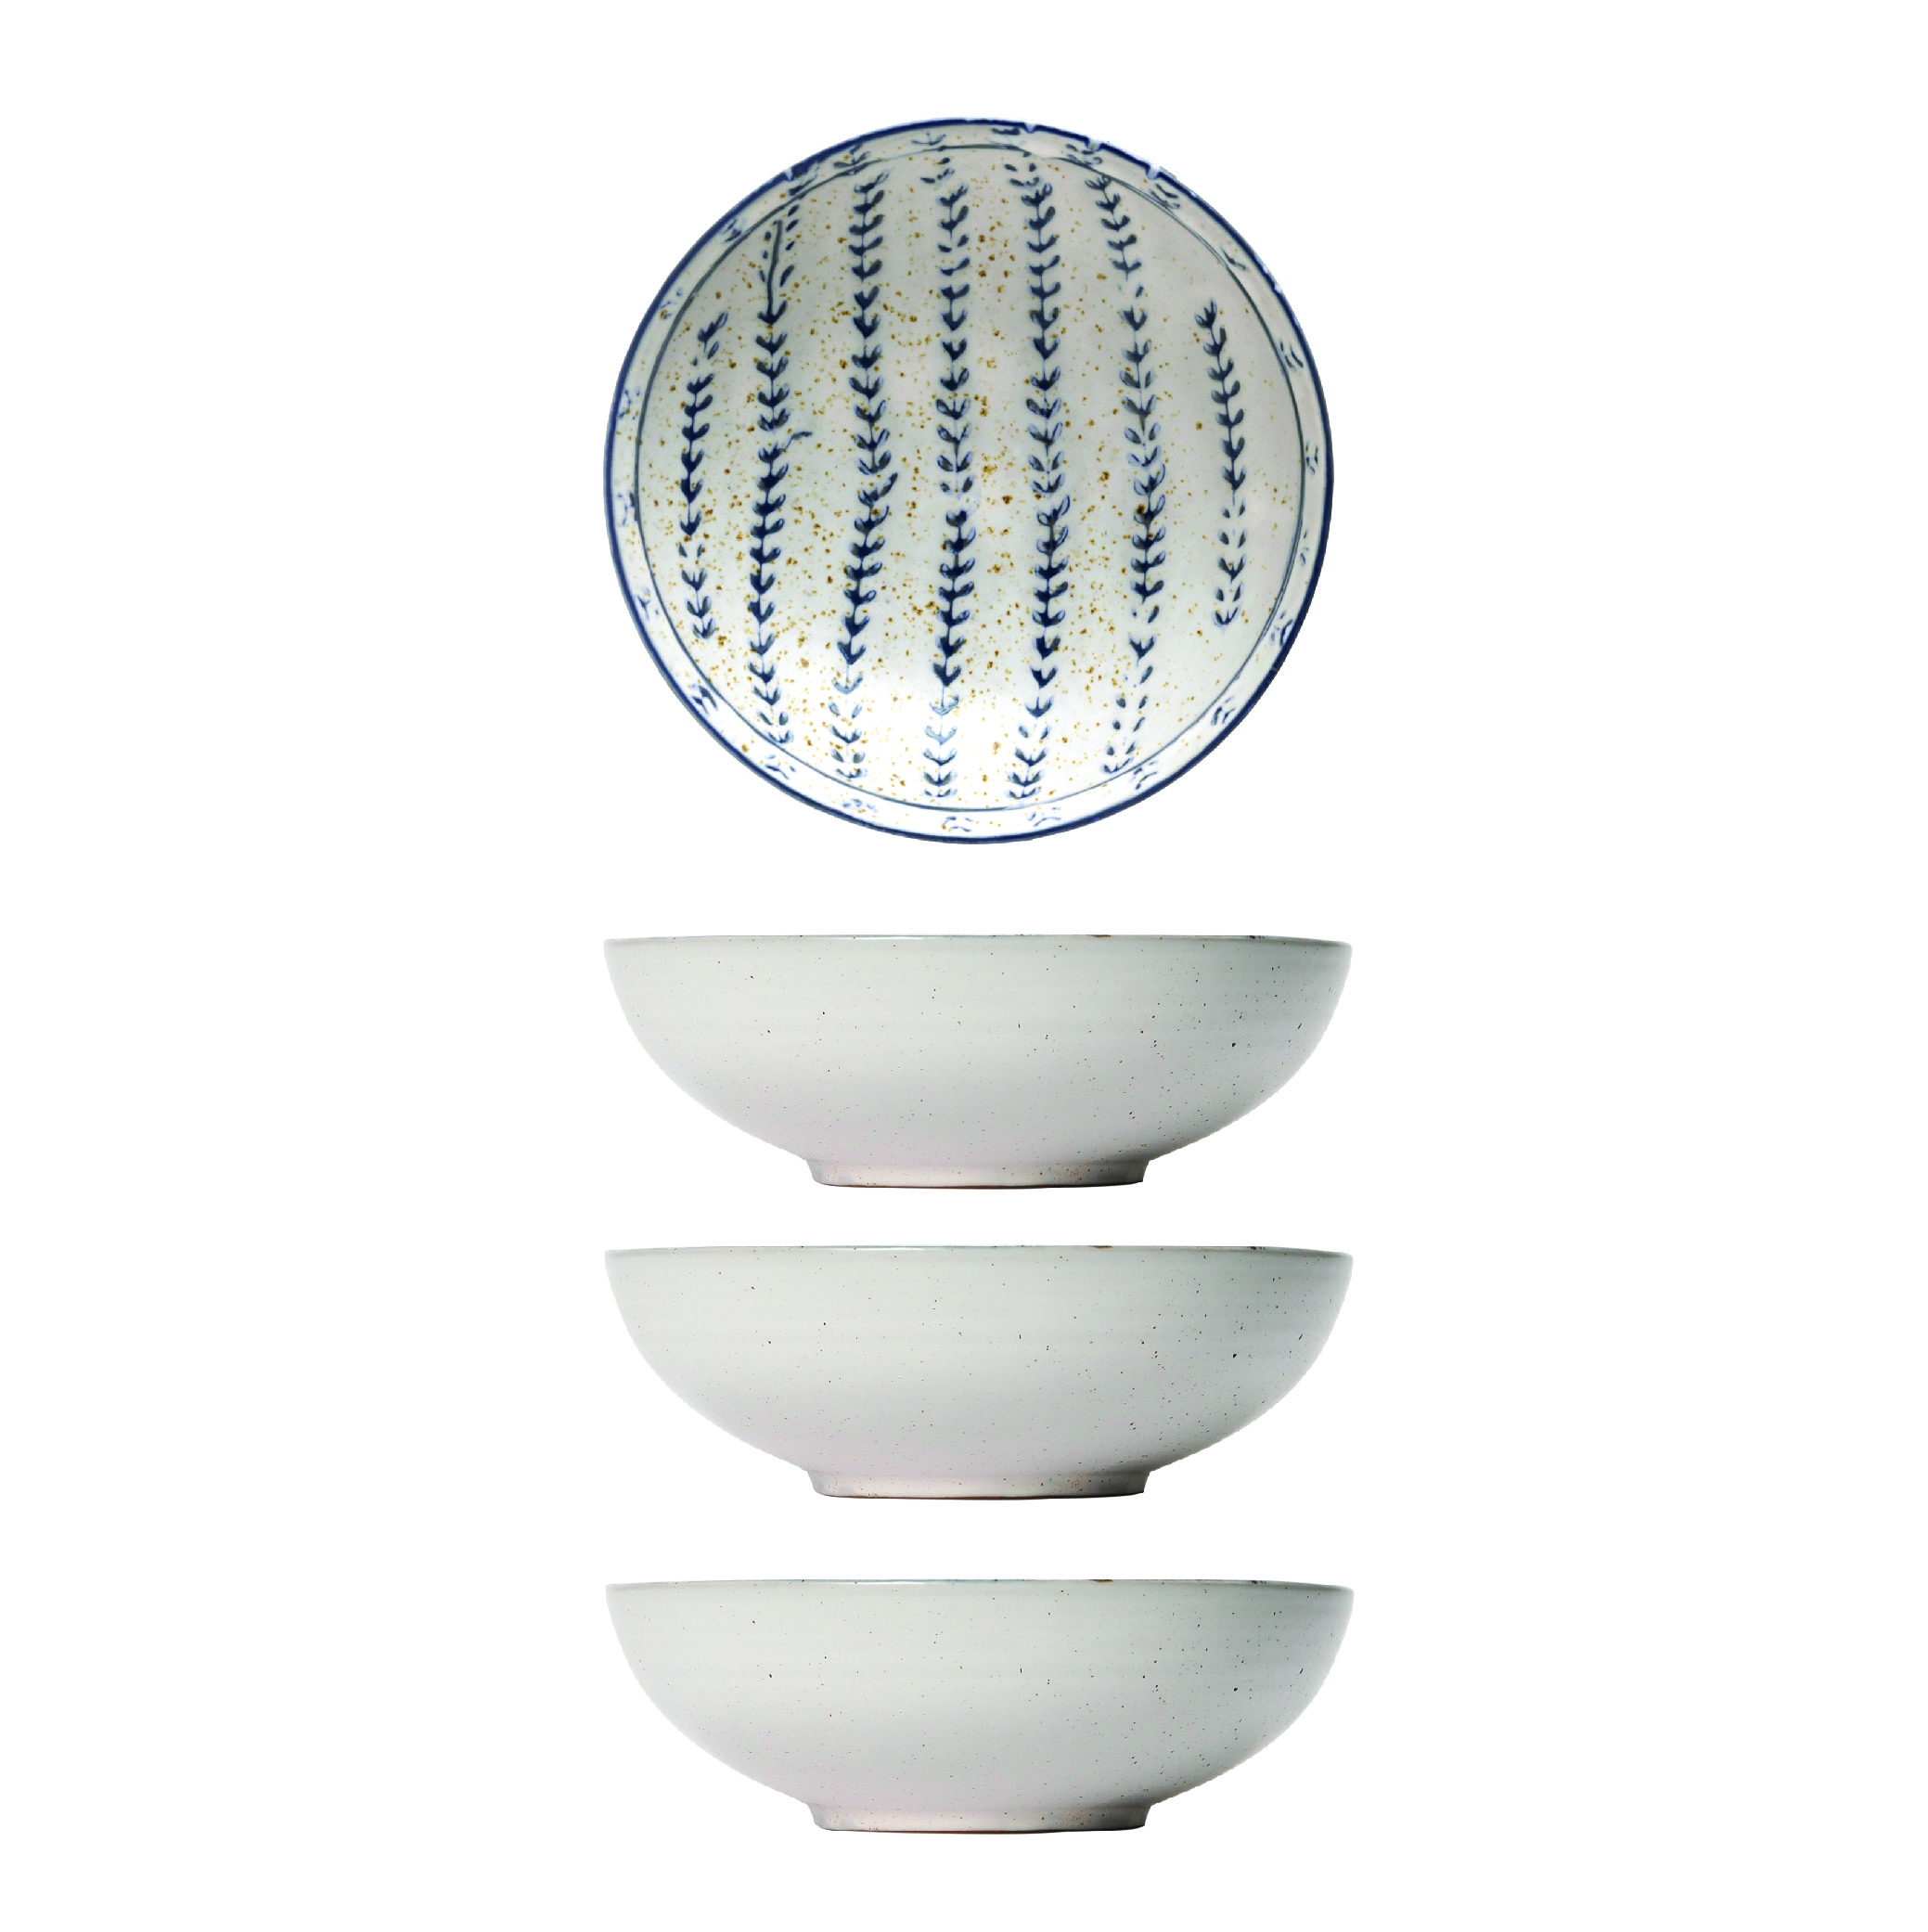  Stoneware Bowl with Debossed Pattern and Reactive Glaze, Antique White and Blue, Set of 4 - Image 0